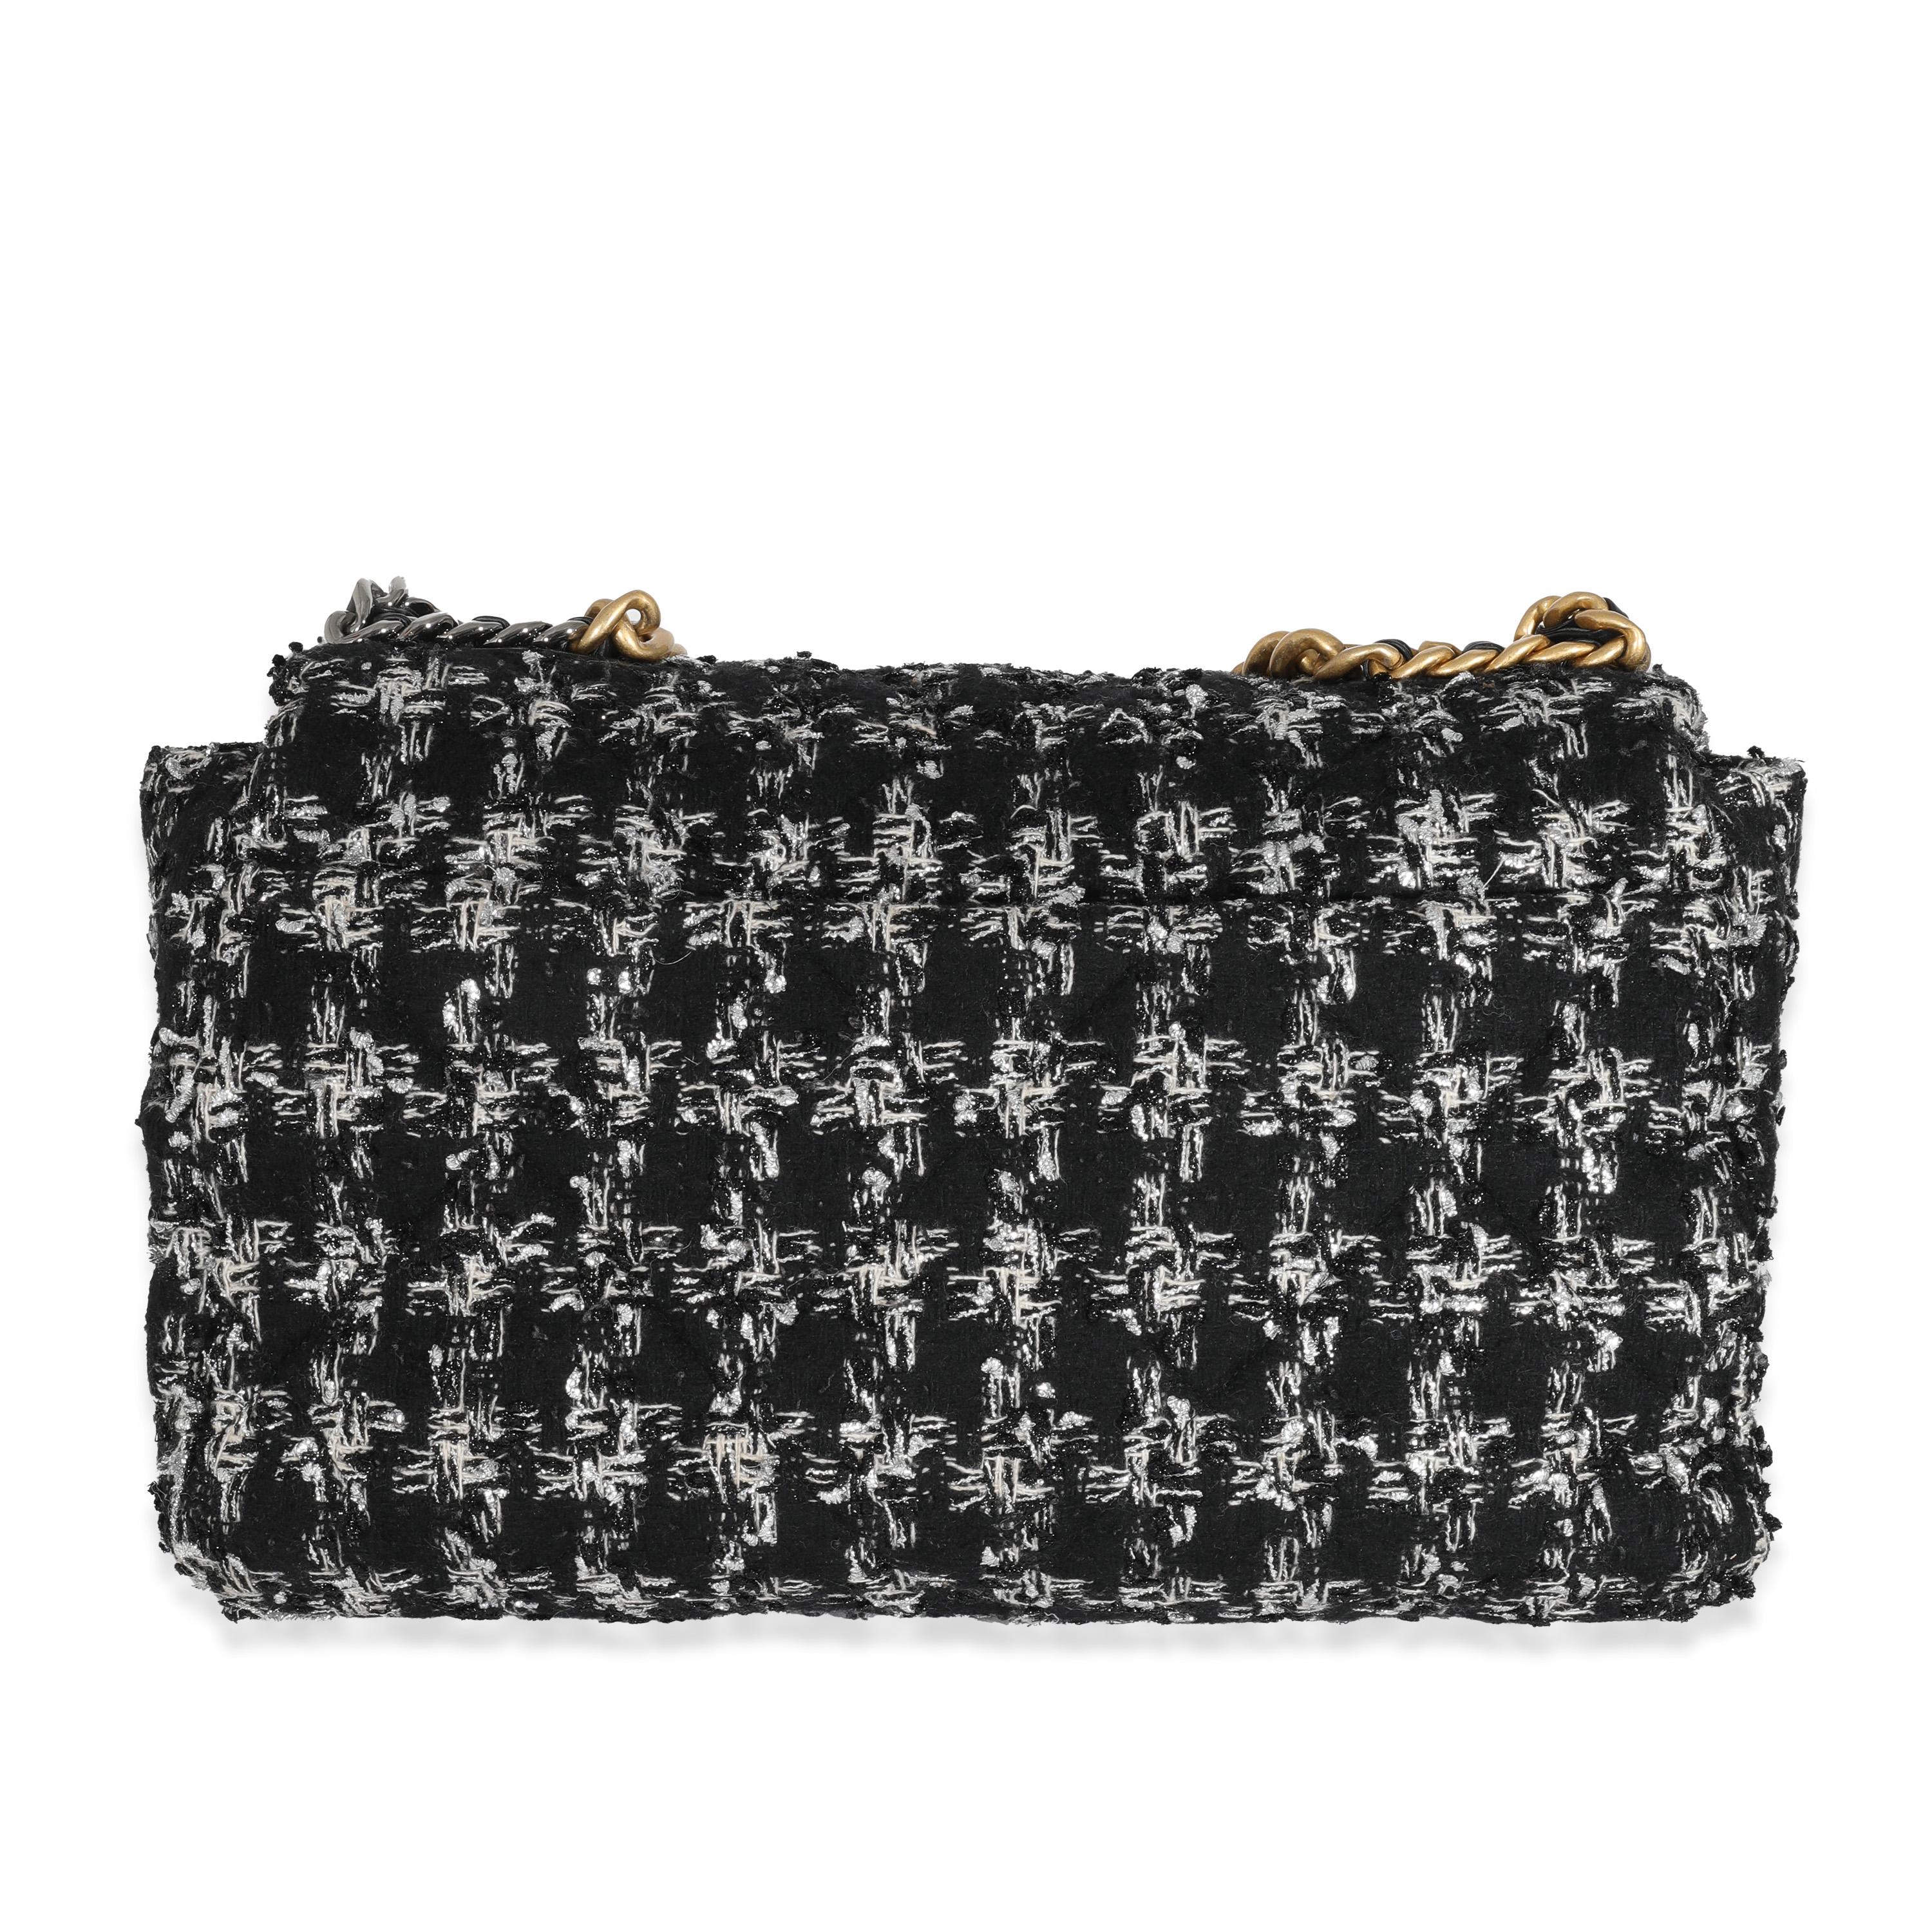 Listing Title: Chanel Black White Metallic Houndstooth Tweed Chanel 19 Maxi Flap Bag
SKU: 131735
Condition: Pre-owned 
Condition Description: A timeless classic that never goes out of style, the flap bag from Chanel dates back to 1955 and has seen a